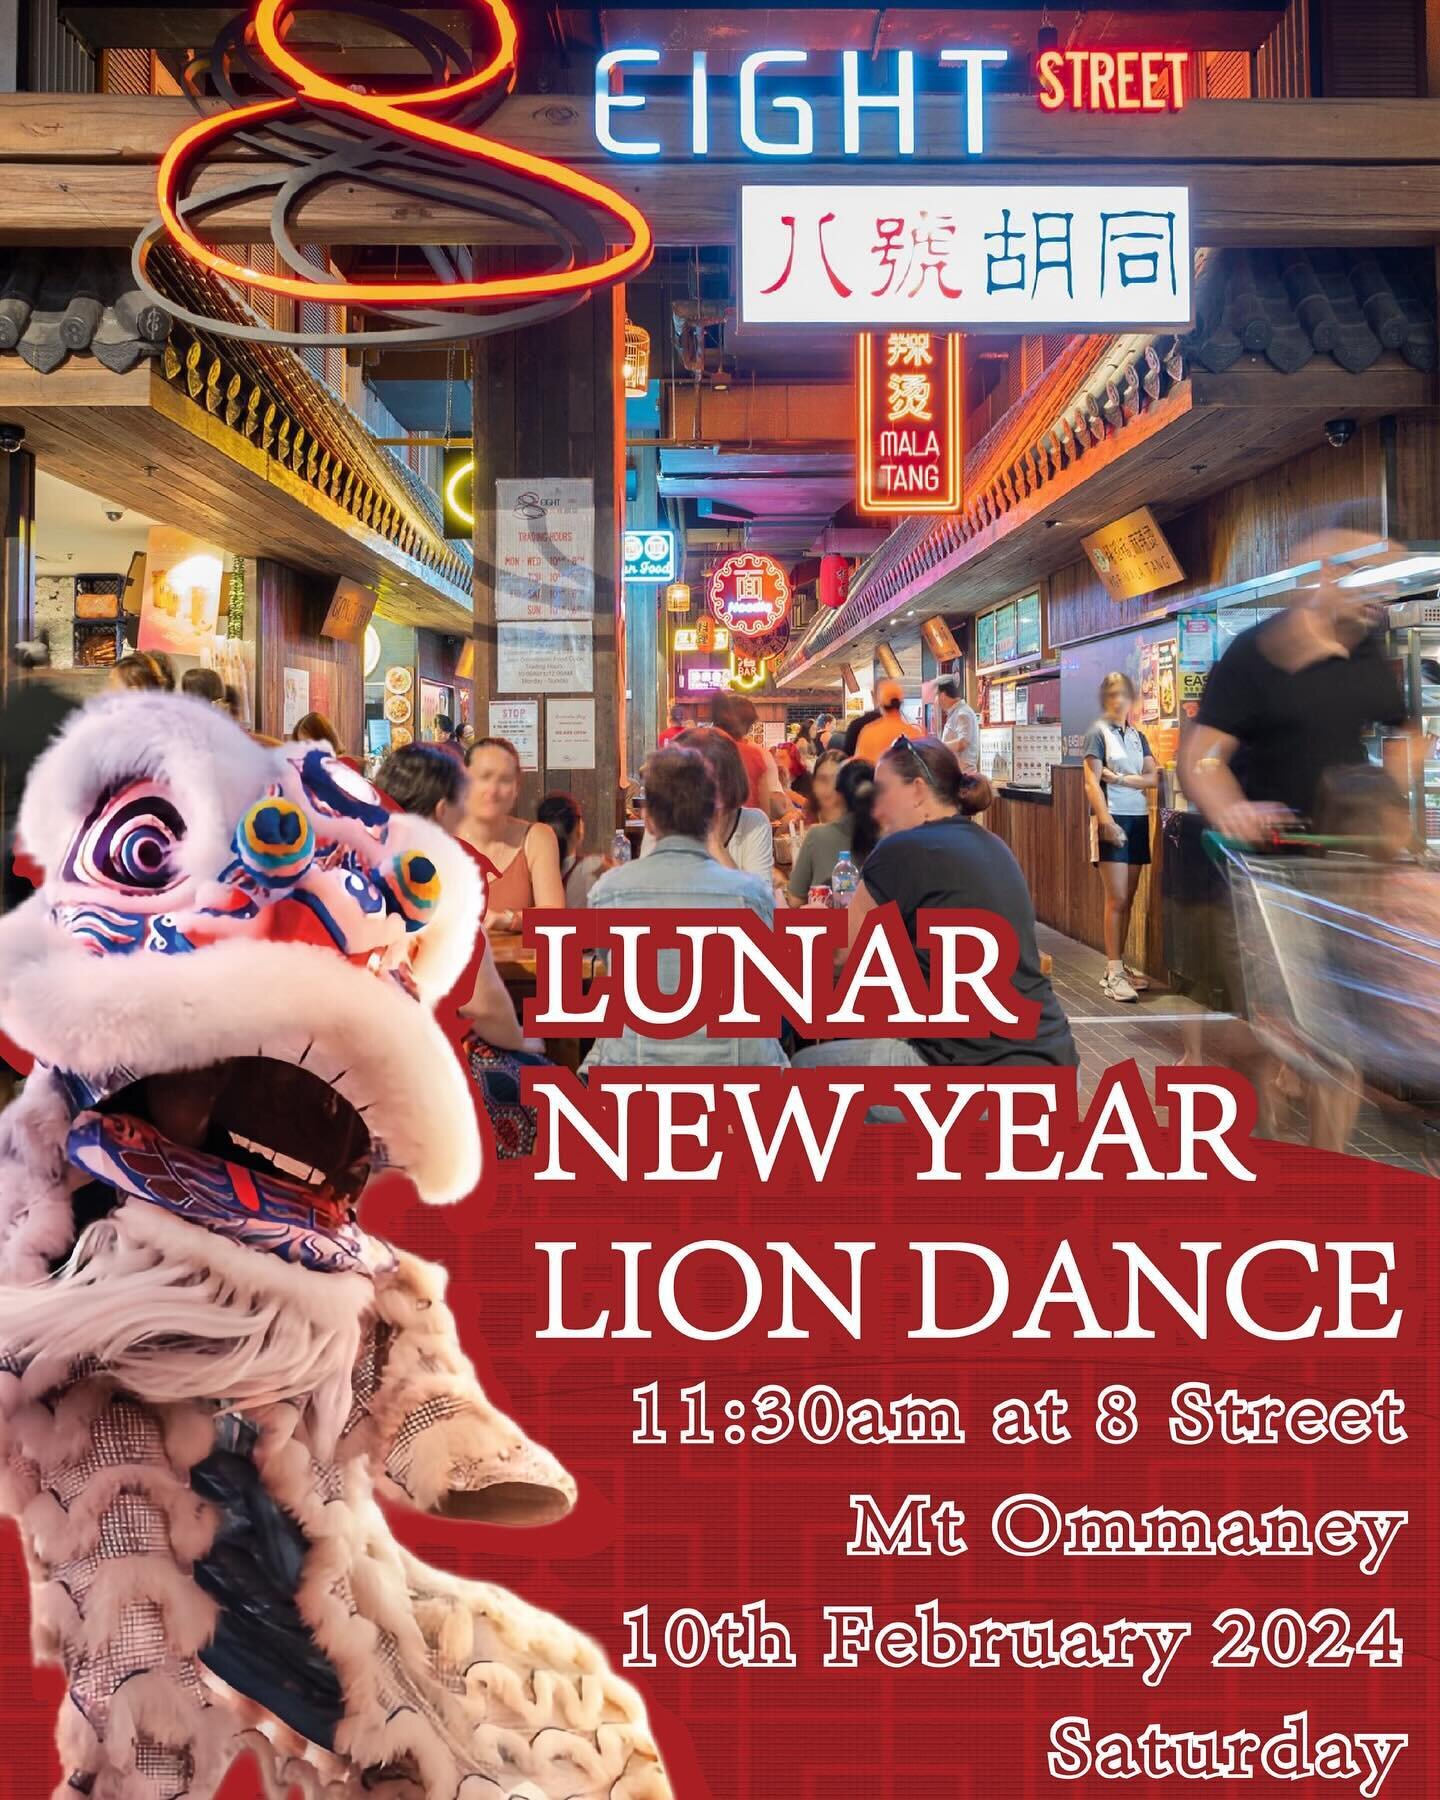 Join us to celebrate Year of the Dragon 🐲 Enjoy traditional Lion dance at 8 street on Saturday, 10th Feb Lunch time to make your Lunar New Year celebration awesome! 
🧨Plus authentic Asia experience with over hundred of Asian dishes and drinks under